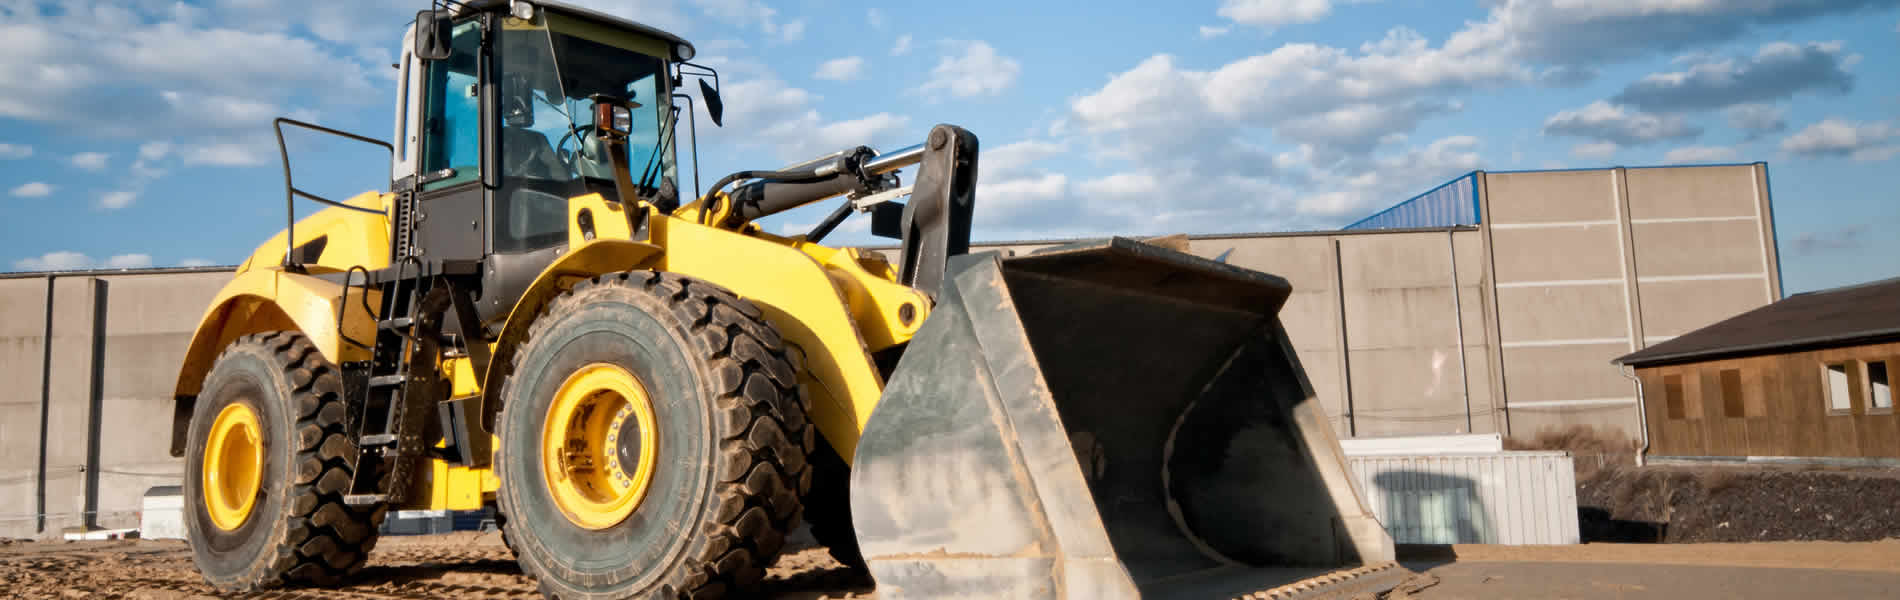 Lease construction equipment thru United Lease and Finance because we have flexible payment plans and more.